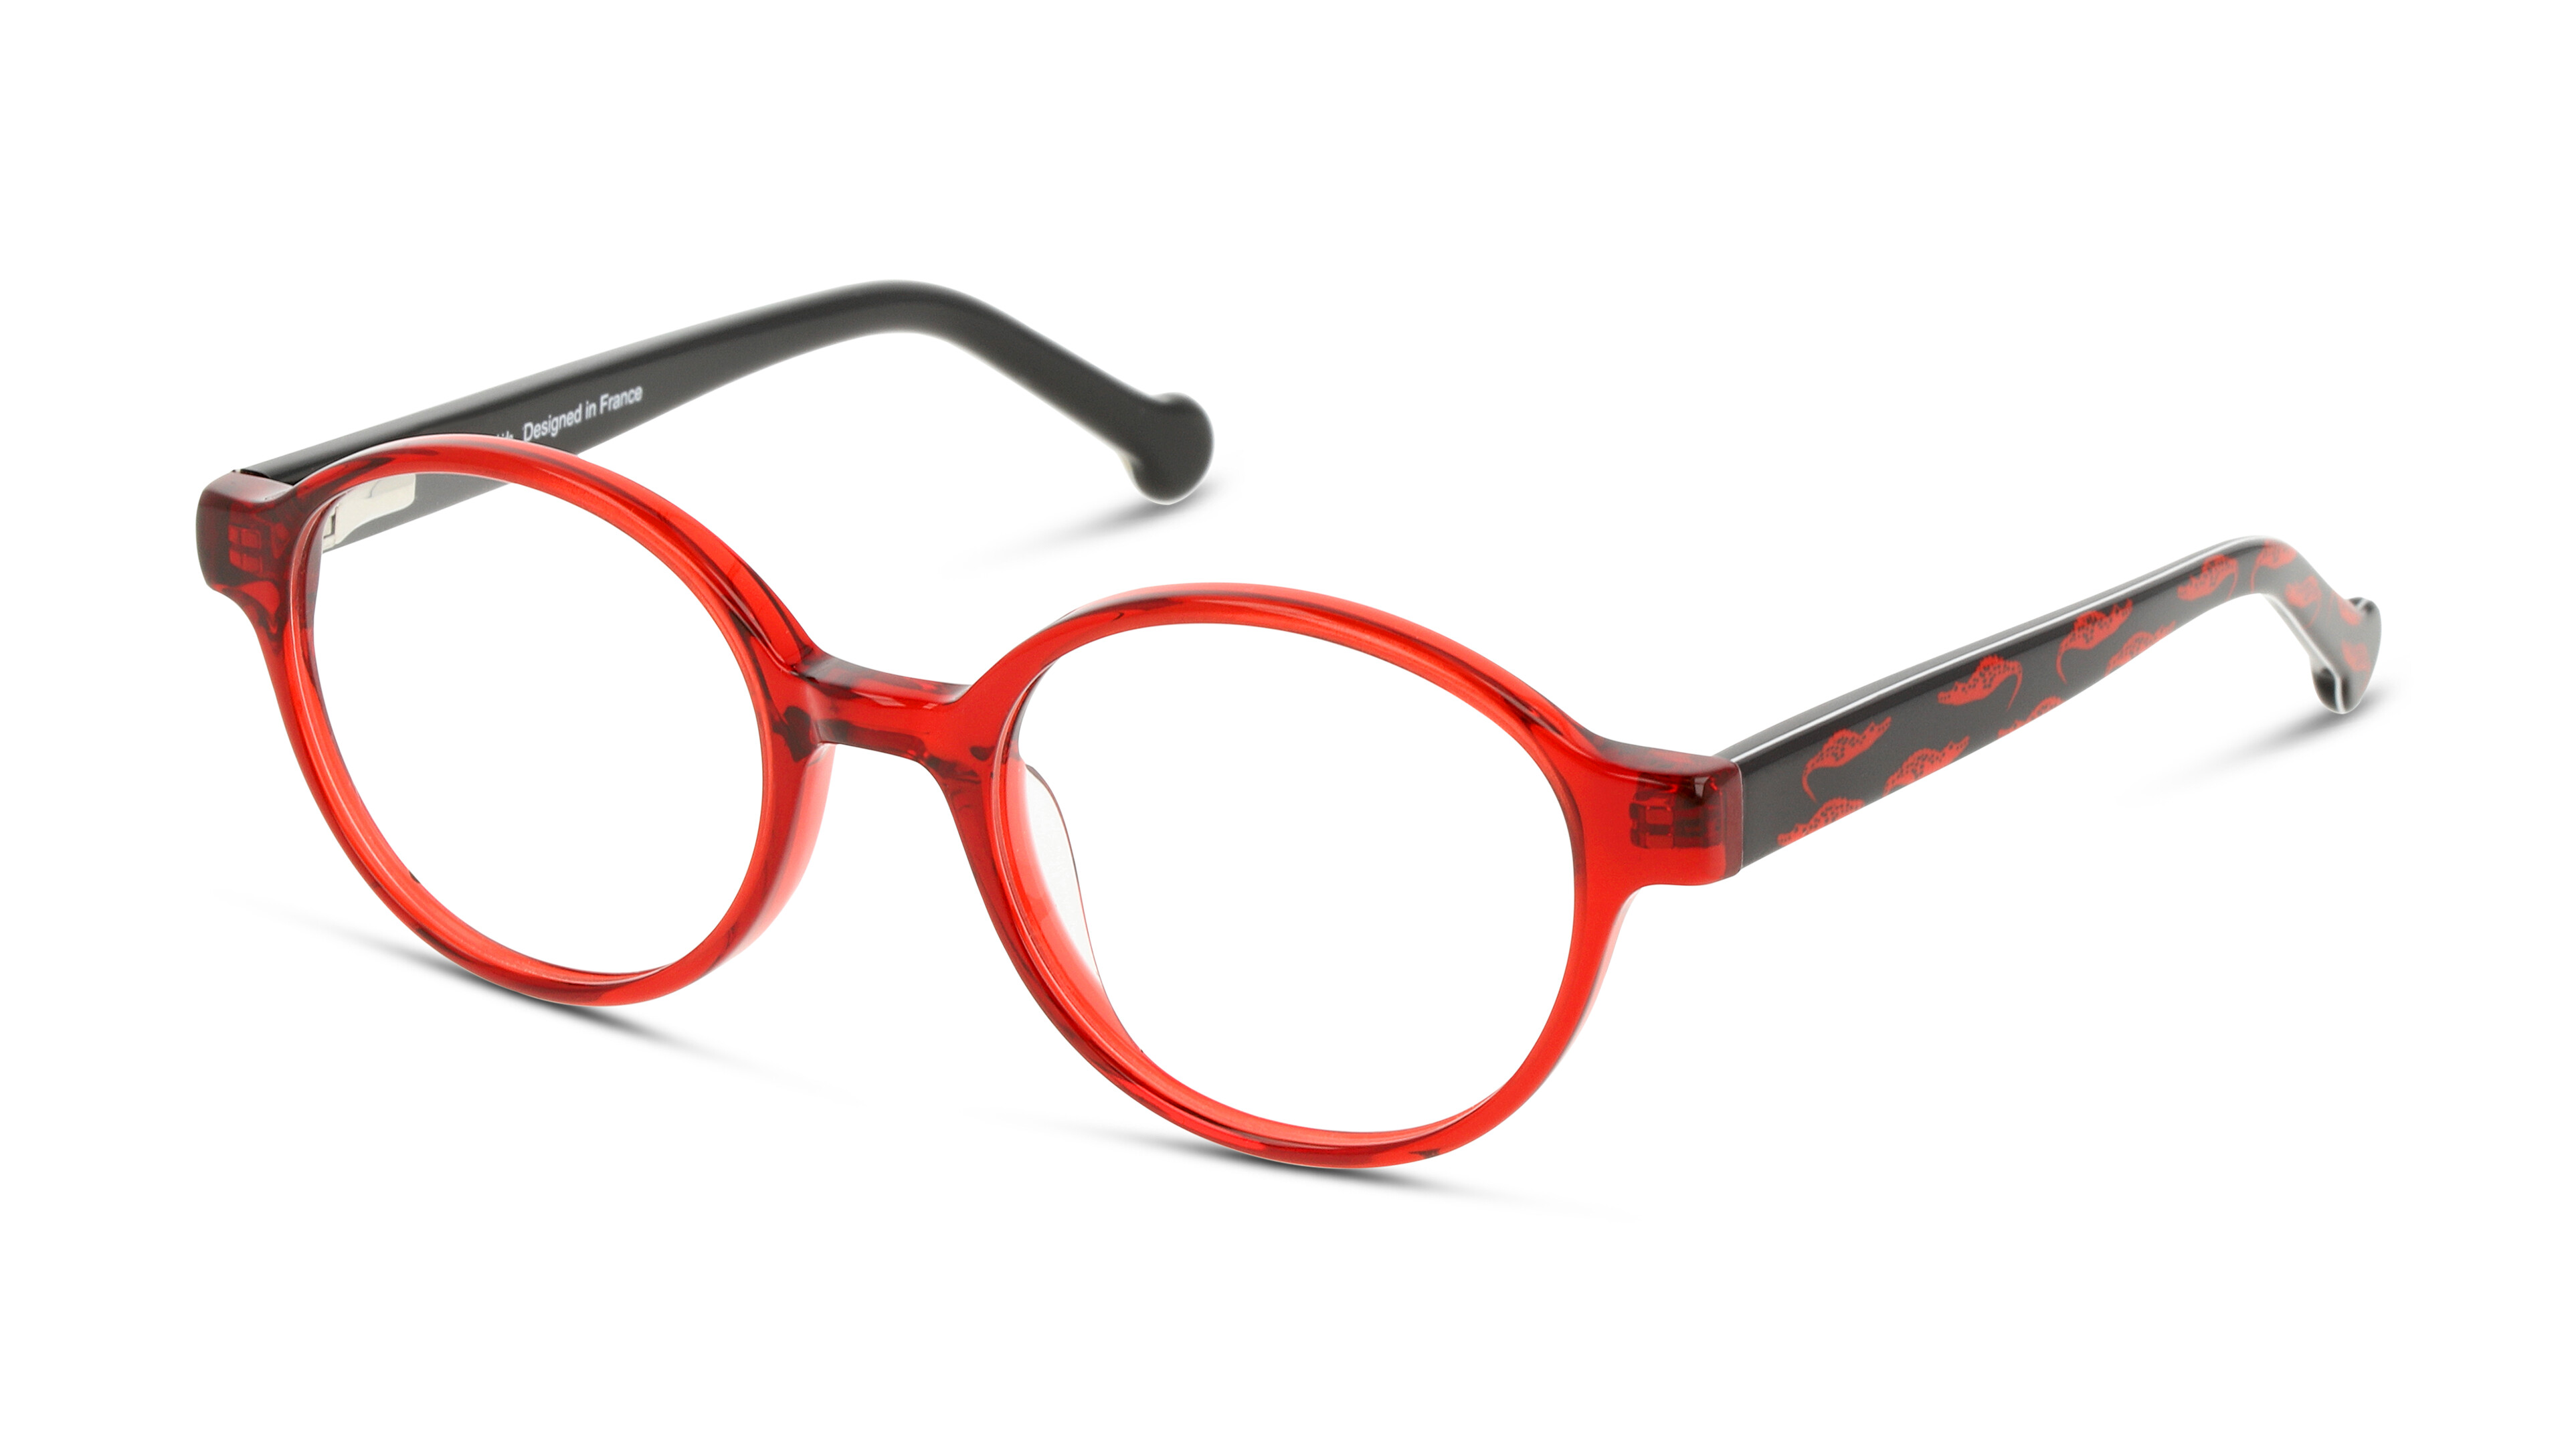 Angle_Left01 UNOFFICIAL UNOK0022 RX00 Brille Rot, Transparent